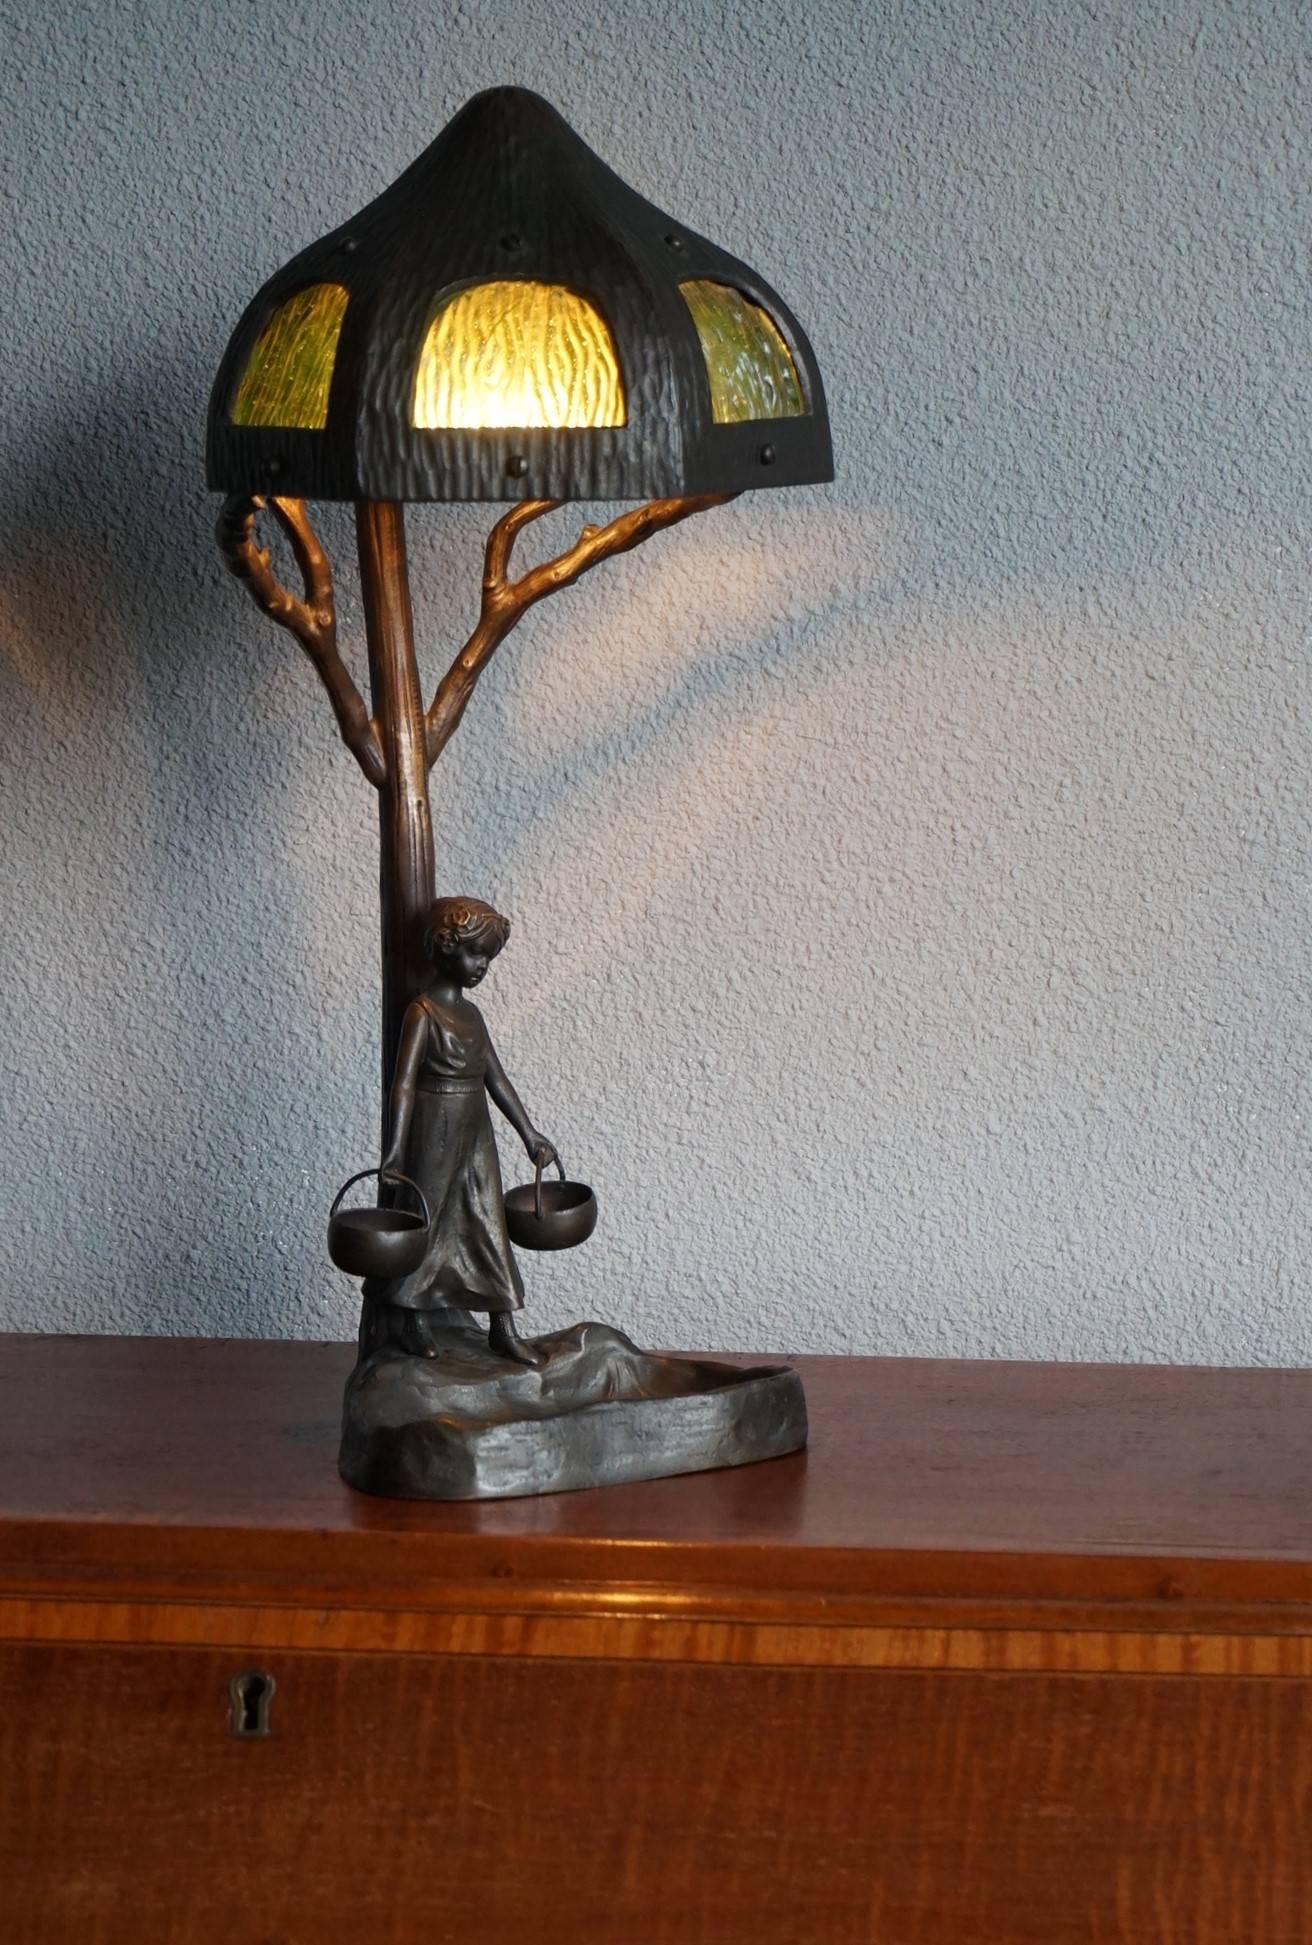 Elegant and highly stylish table lamp.

This handcrafted, bronze table lamp from 1890-1910 is of museum quality and condition. This top-quality antique has an amazing look and feel and it was either made in Germany or Austria. This work of lighting